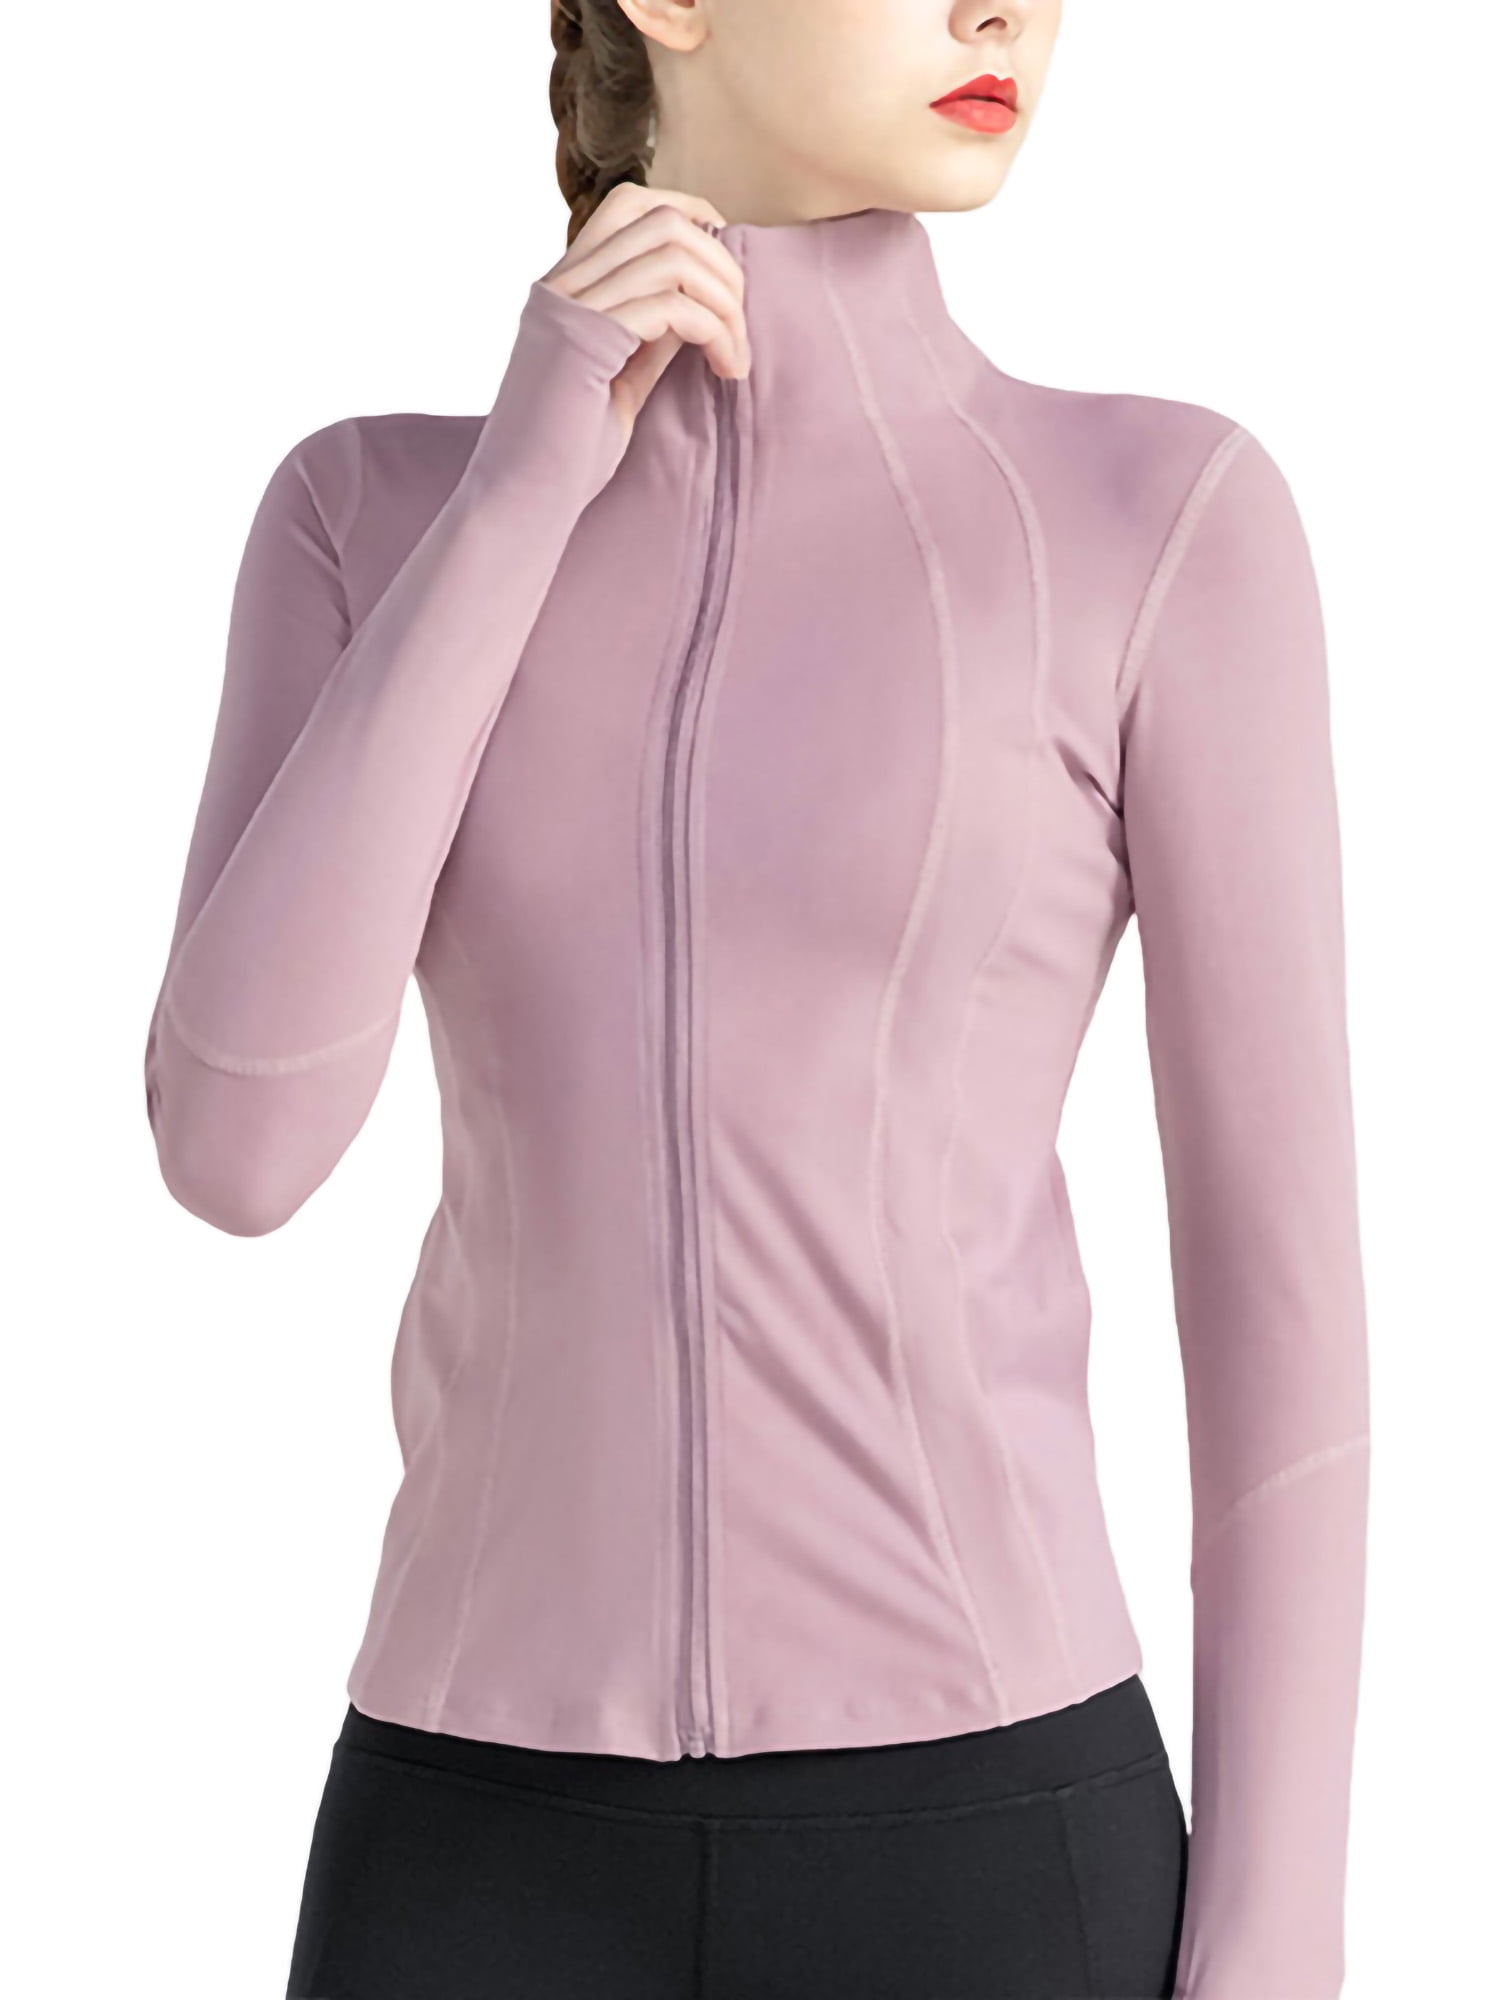 TrainingGirl Women Full Zip Workout Sports Jackets Slim Fit Long Sleeve  Yoga Track Hoodie Thumb Hole Athletic Running Jackets (Pink, Medium) at   Women's Clothing store